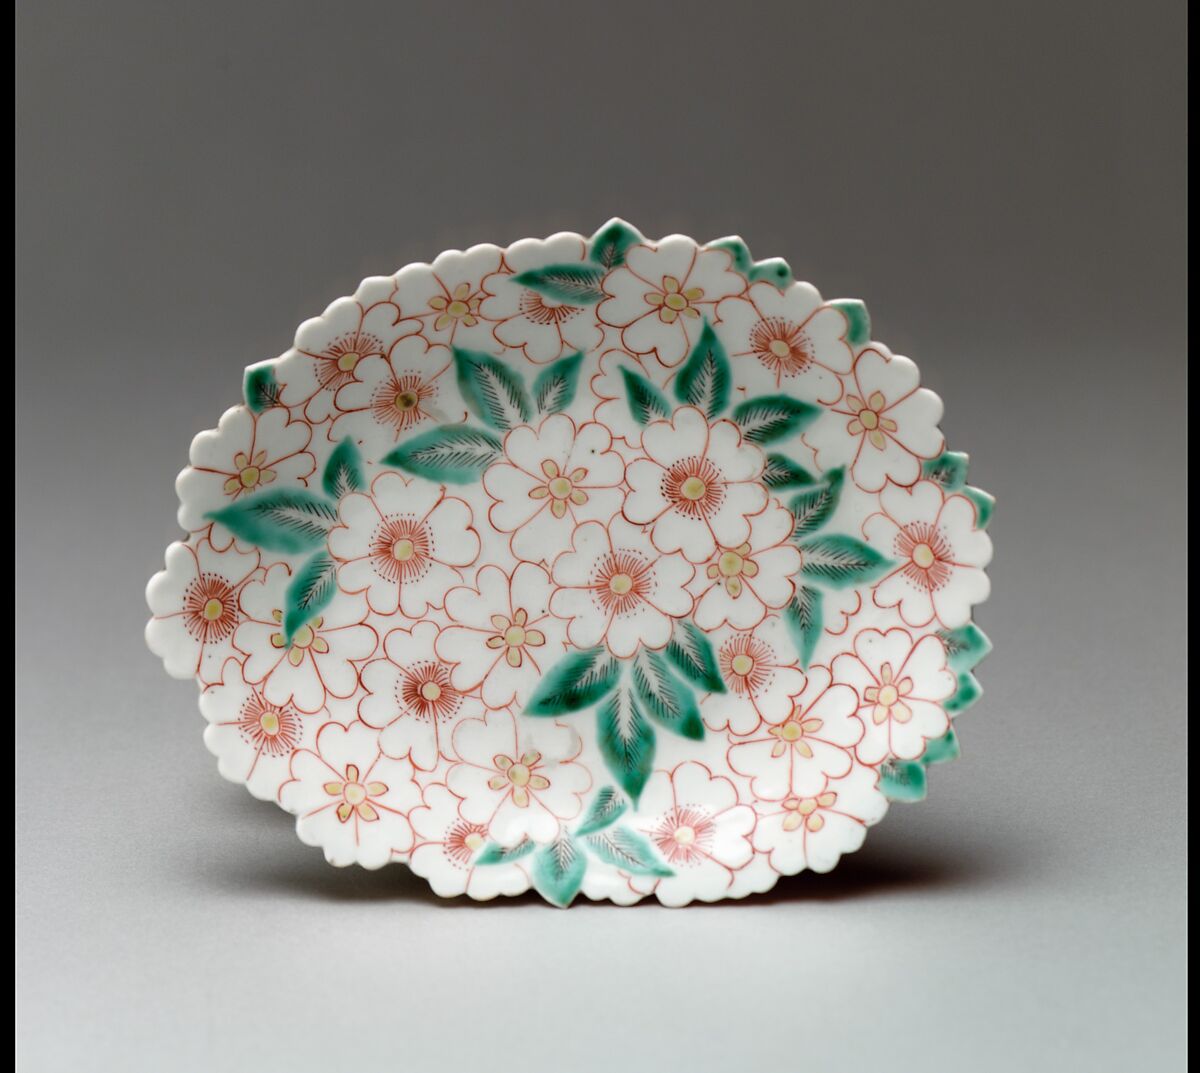 Dish with Cherry Blossoms, Porcelain with overglaze polychrome enamels (Hizen ware, Nabeshima type), Japan 